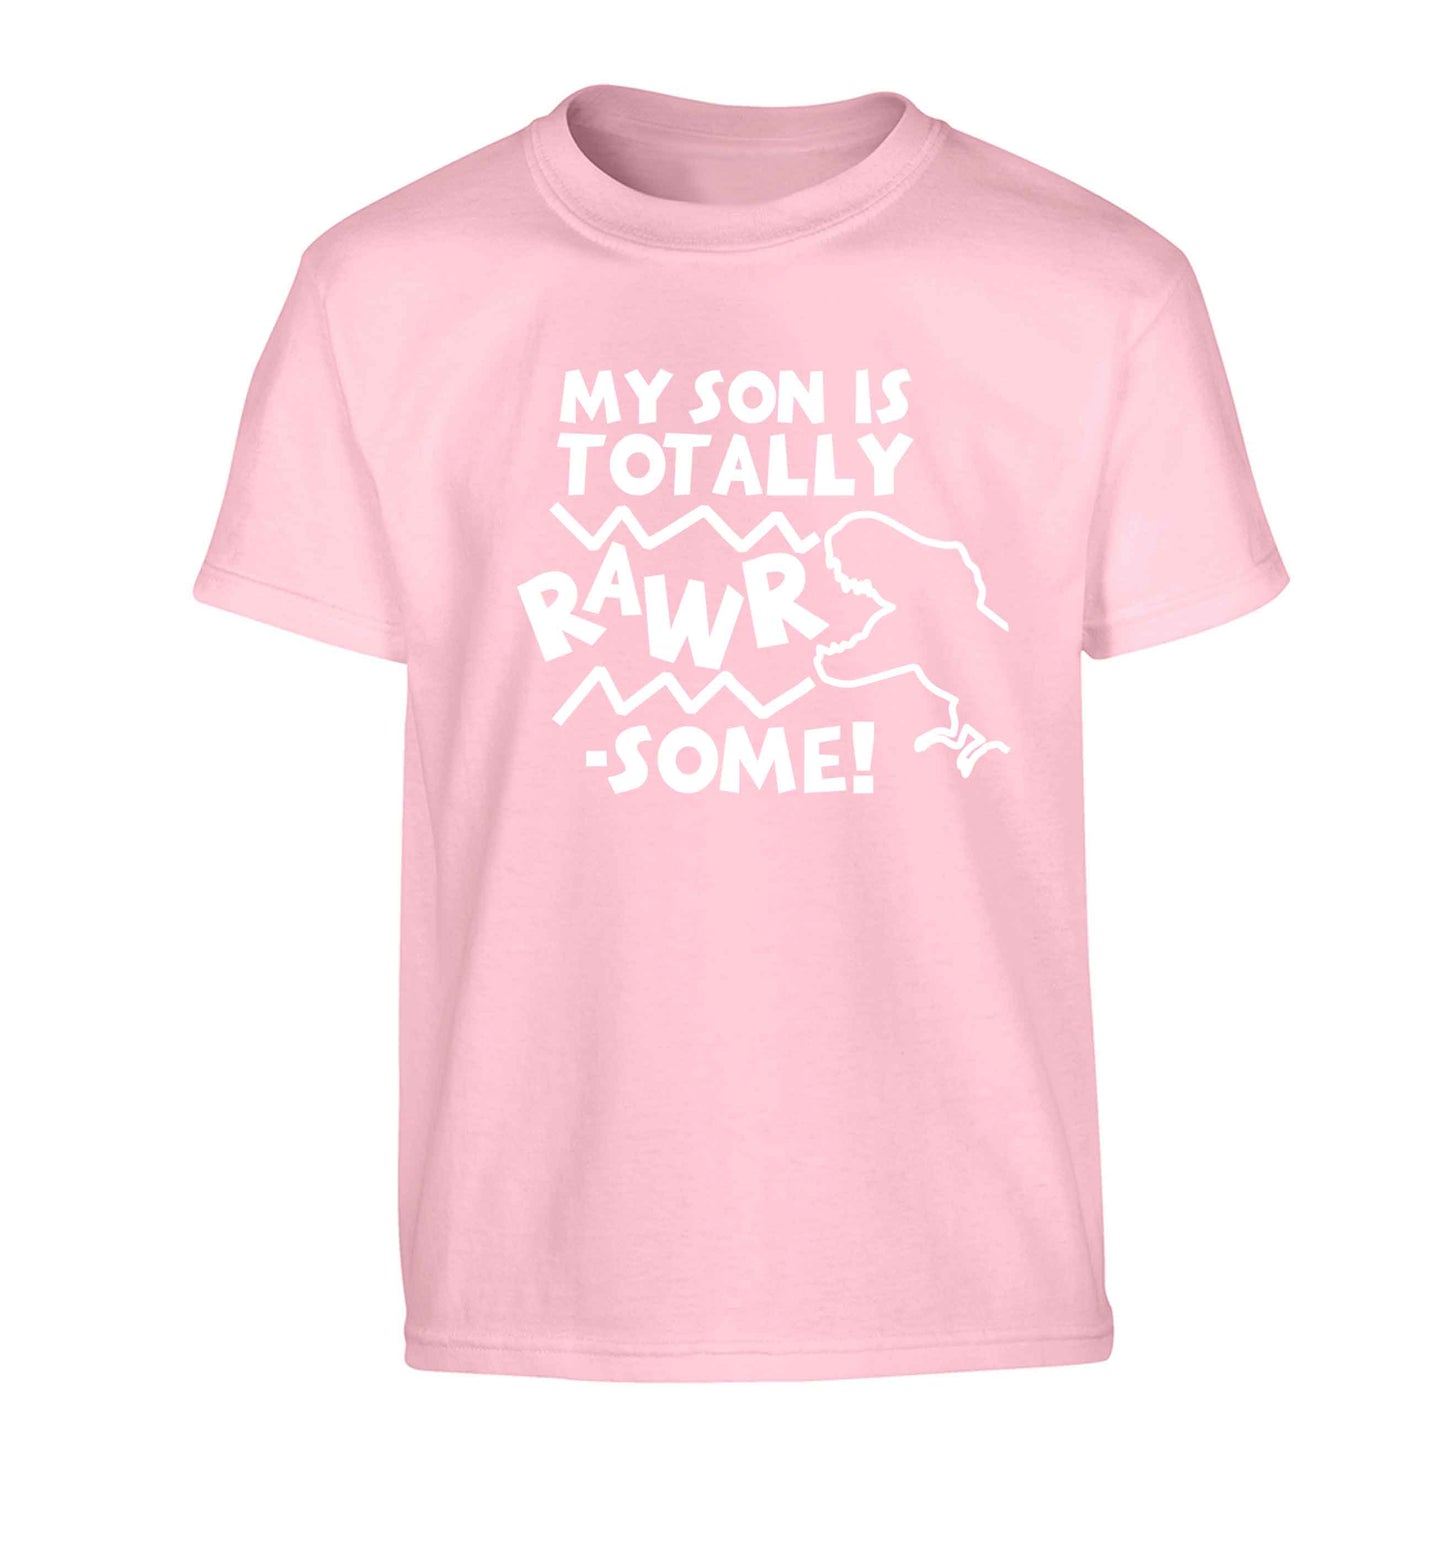 My son is totally rawrsome Children's light pink Tshirt 12-13 Years